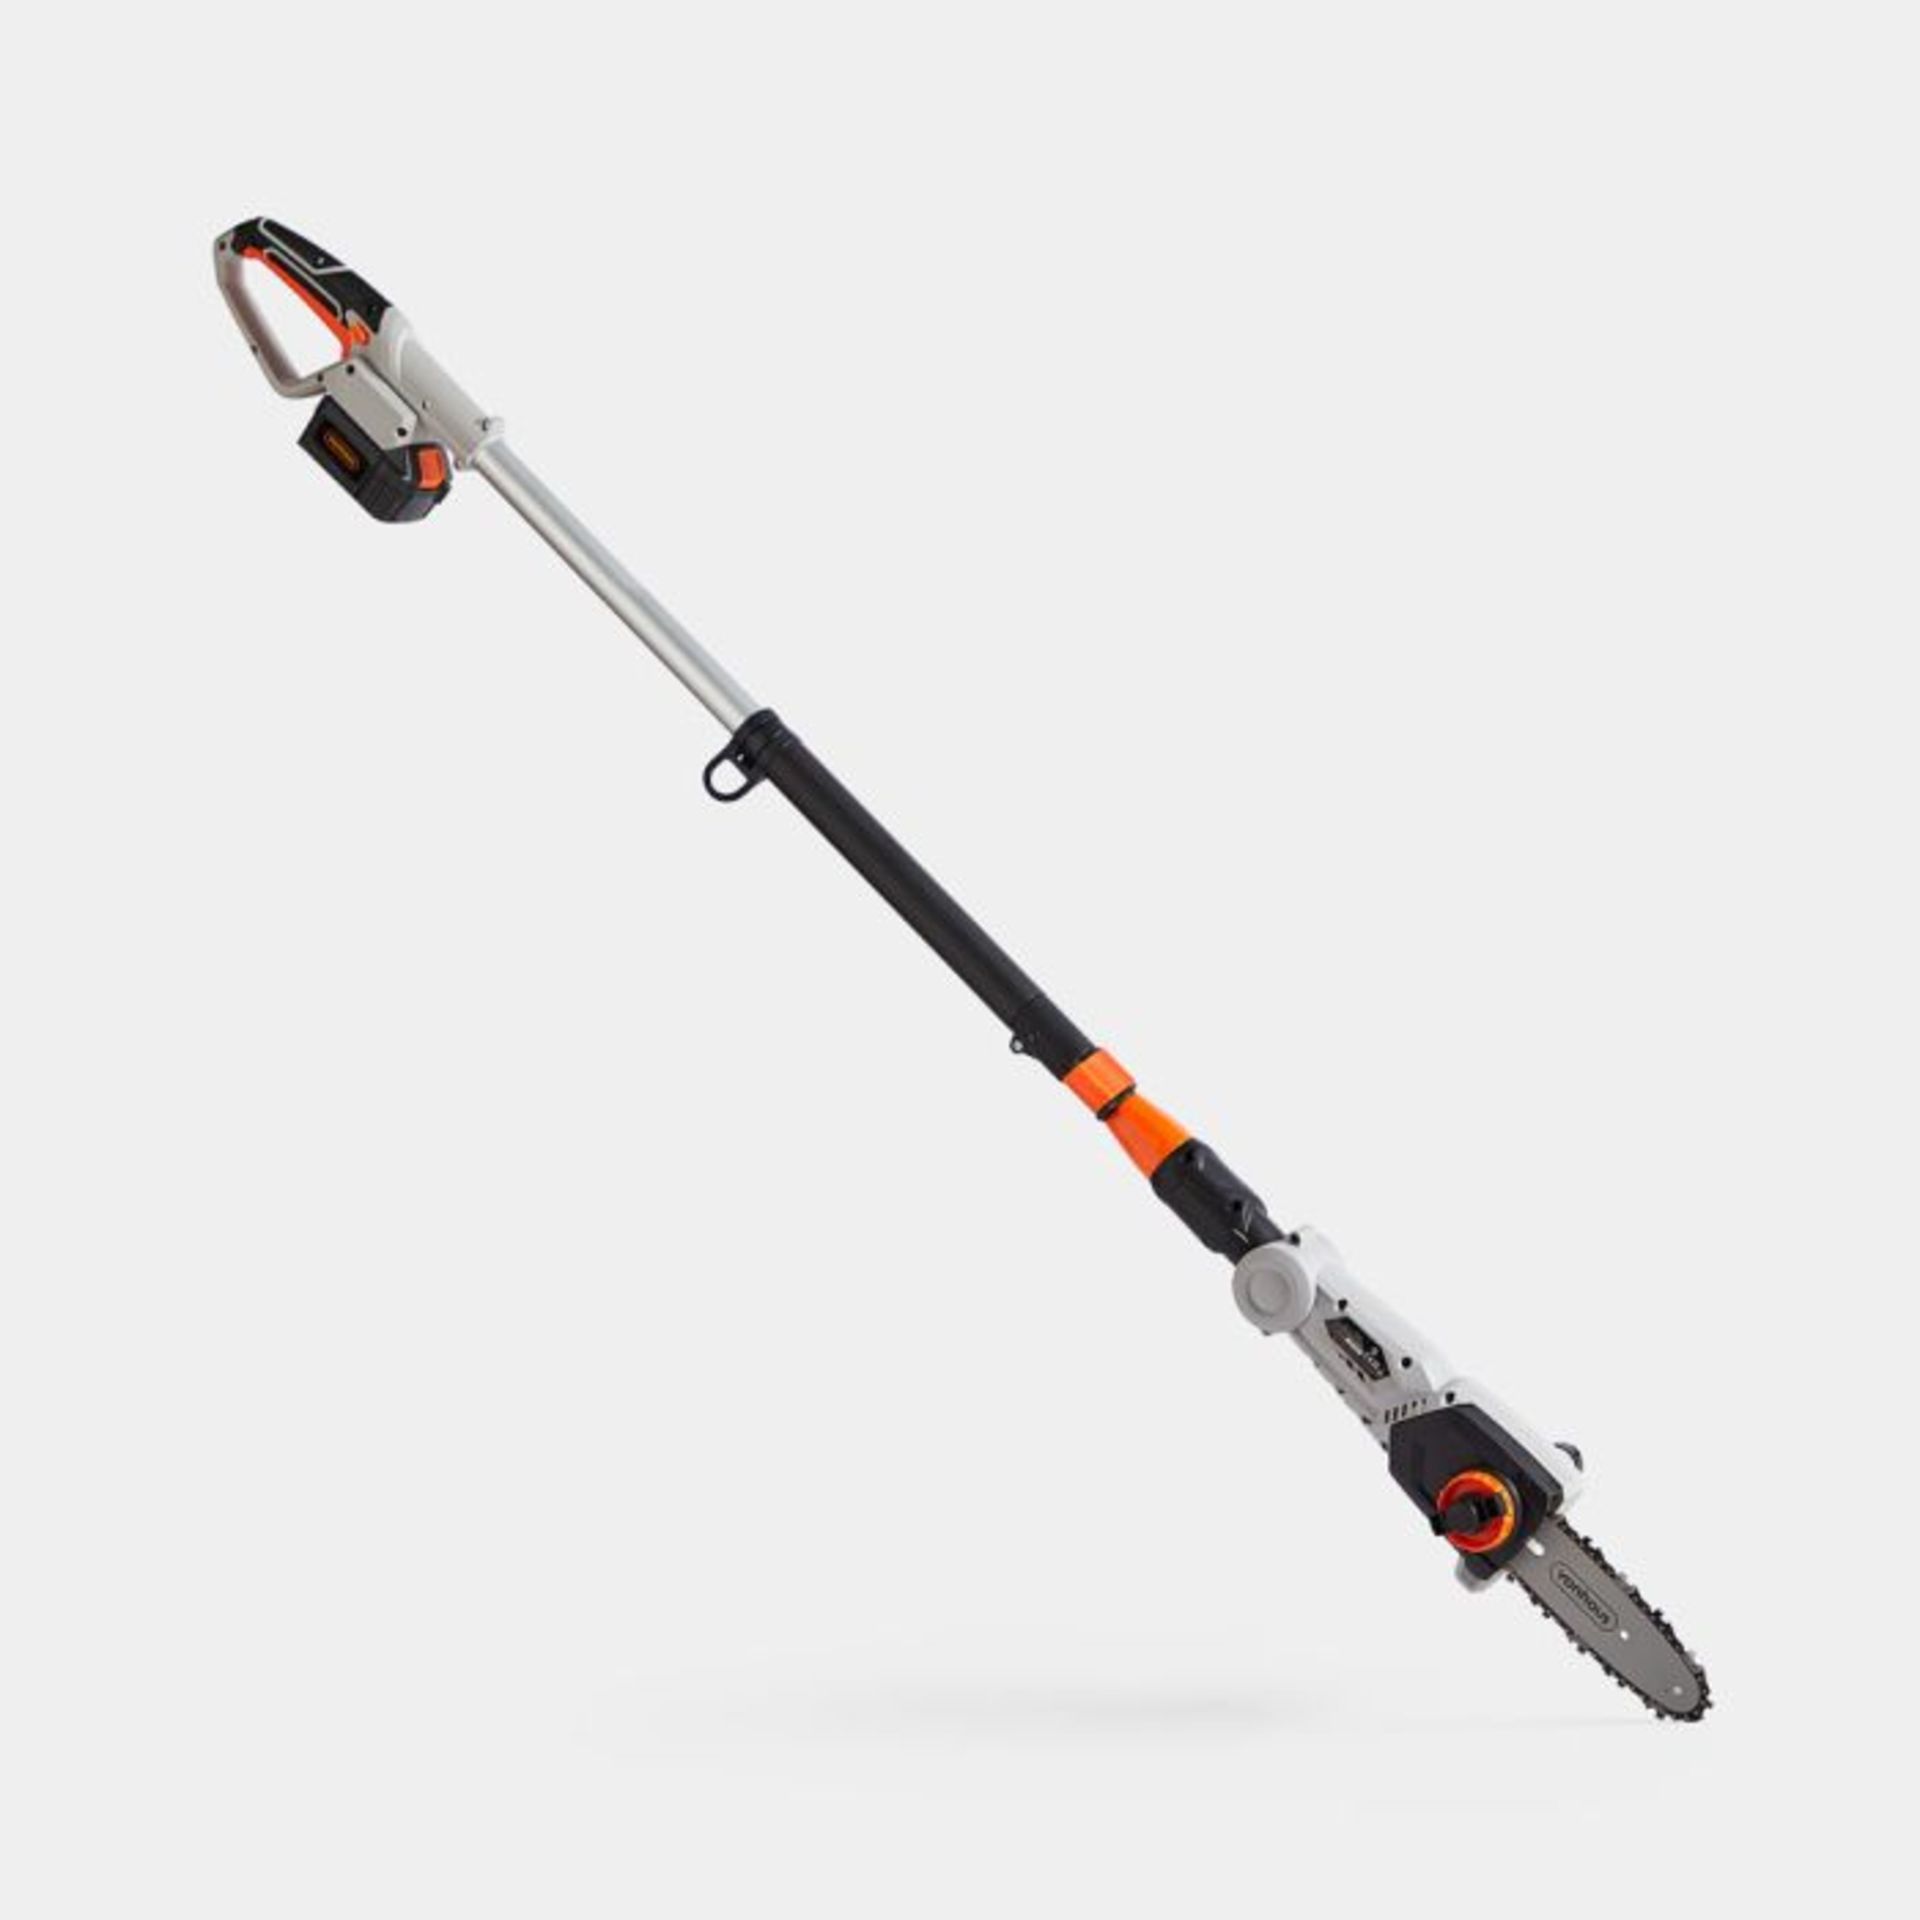 40V Cordless Pole Chainsaw. - ER36. A high powered 40V battery powers the 8FT telescopic